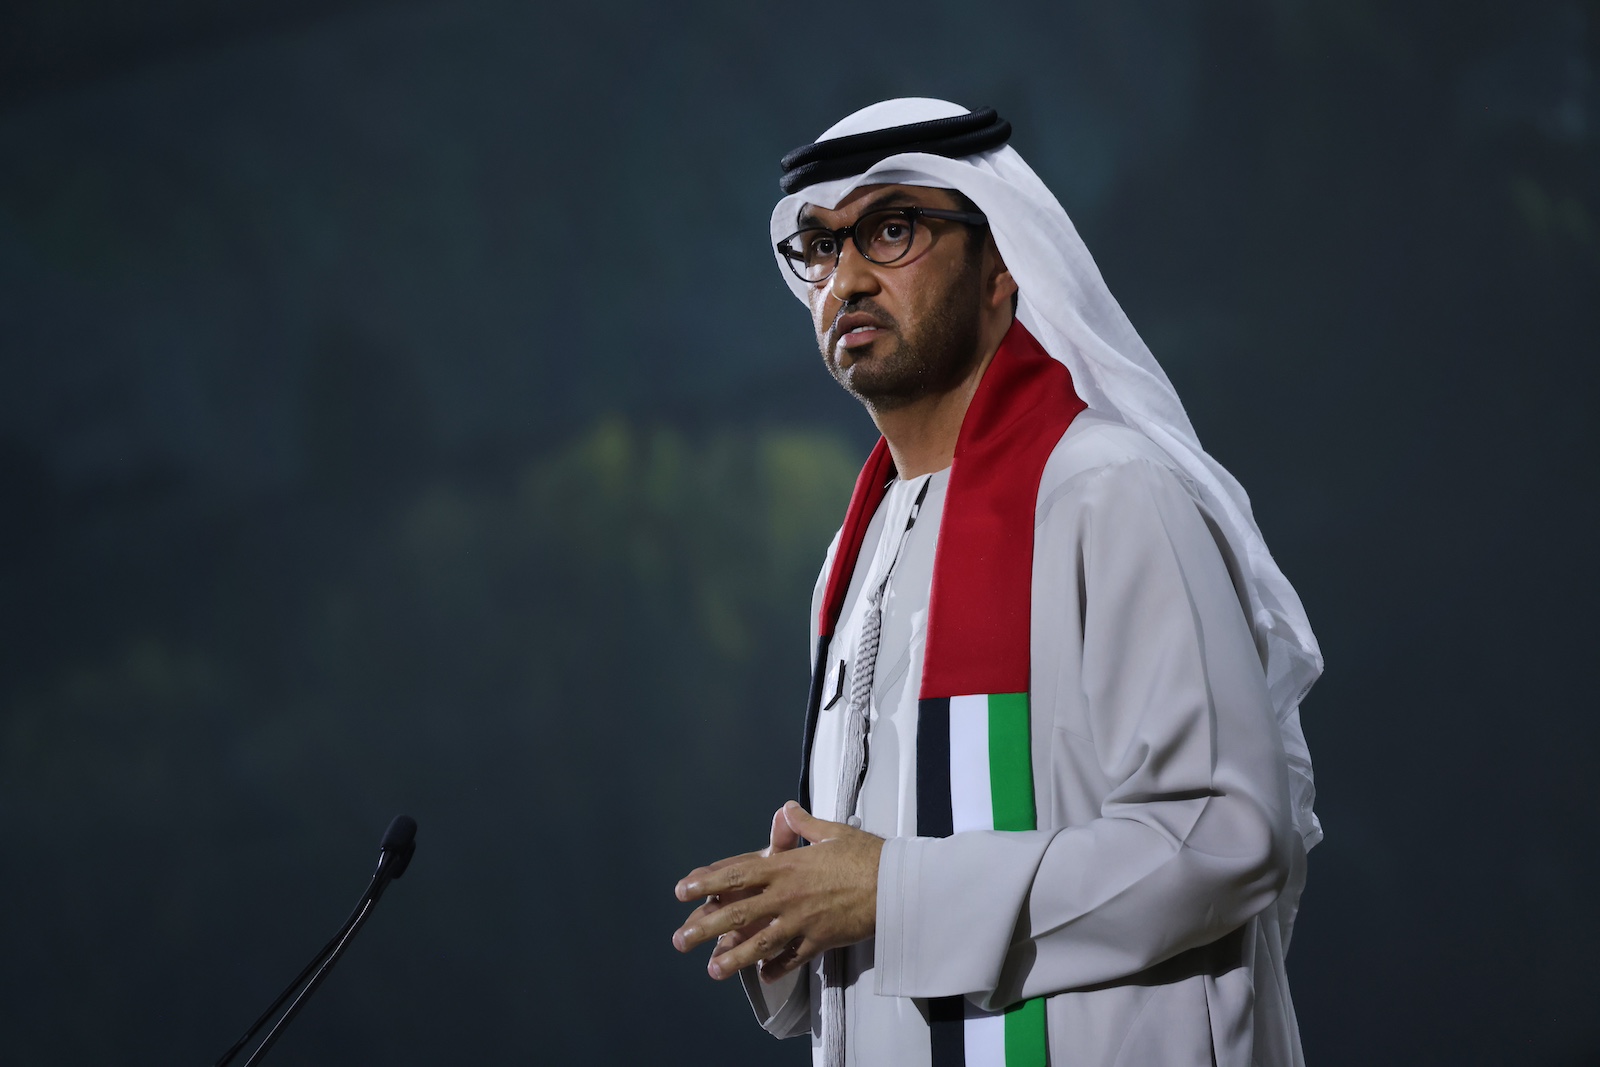 Leaked Documents Have Revealed The UAE Planned To Use COP28 To Make Oil Deals